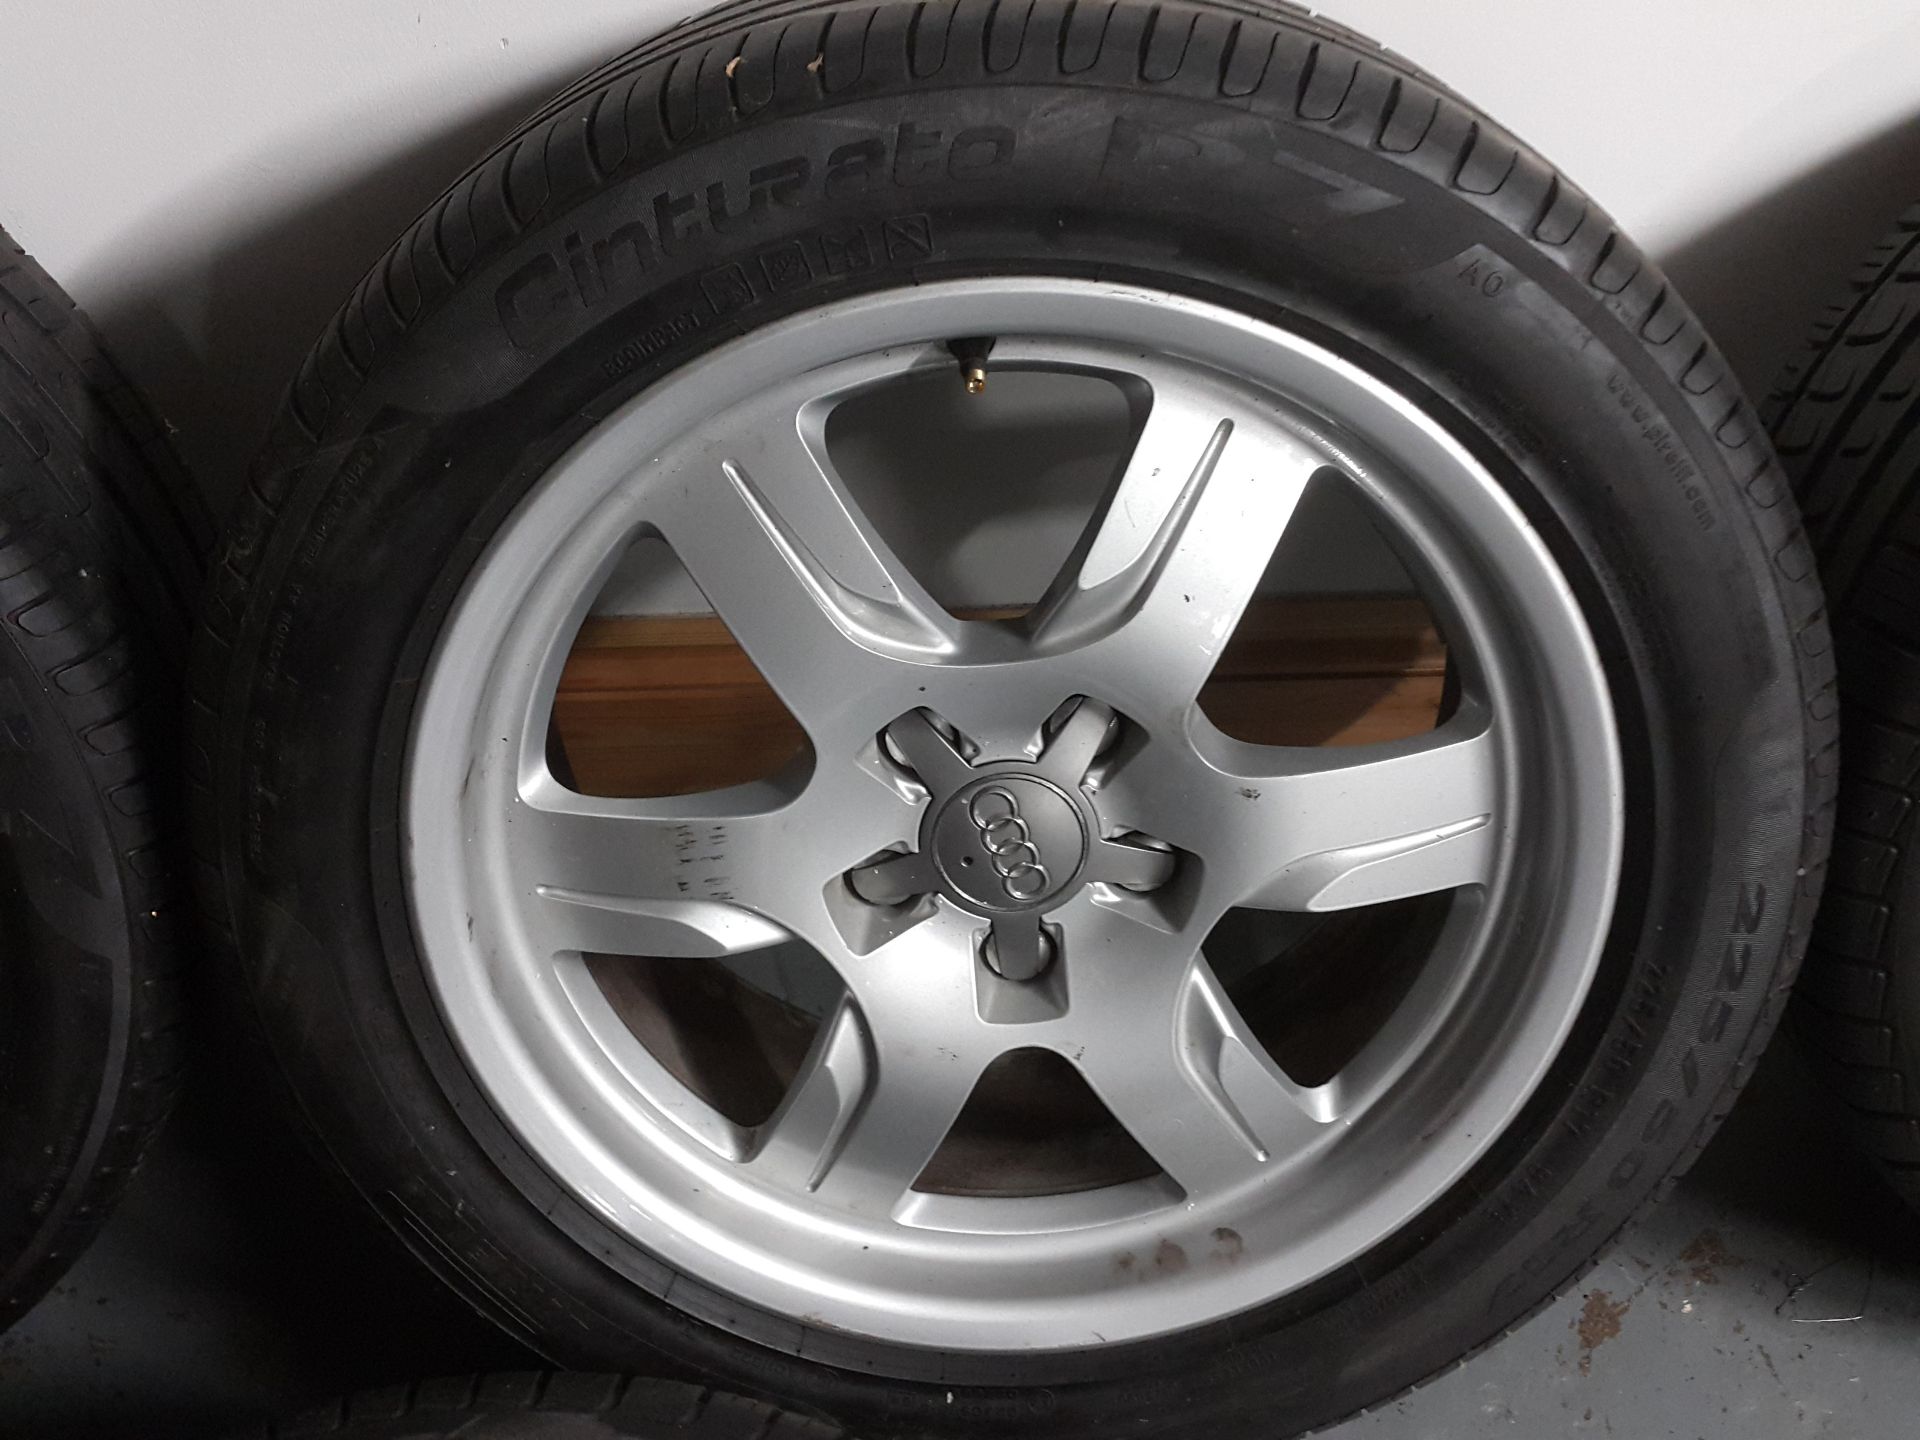 4 X AUDI A5 17" ALLOY WHEELS WITH PIRELLI CINTURATO TYRES 225/50/R17 - Image 4 of 9